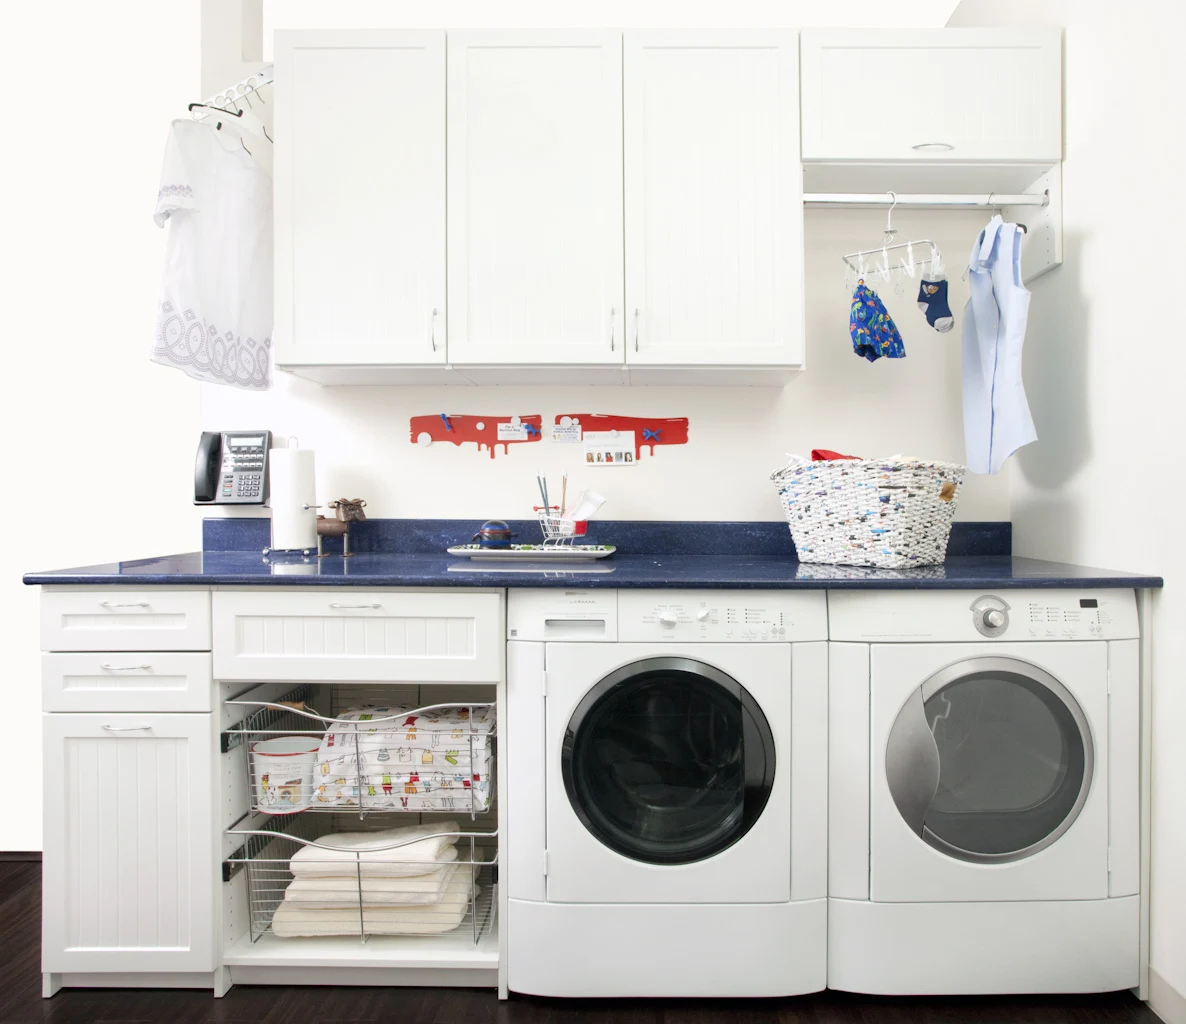 What You Should Store in Your Laundry Room